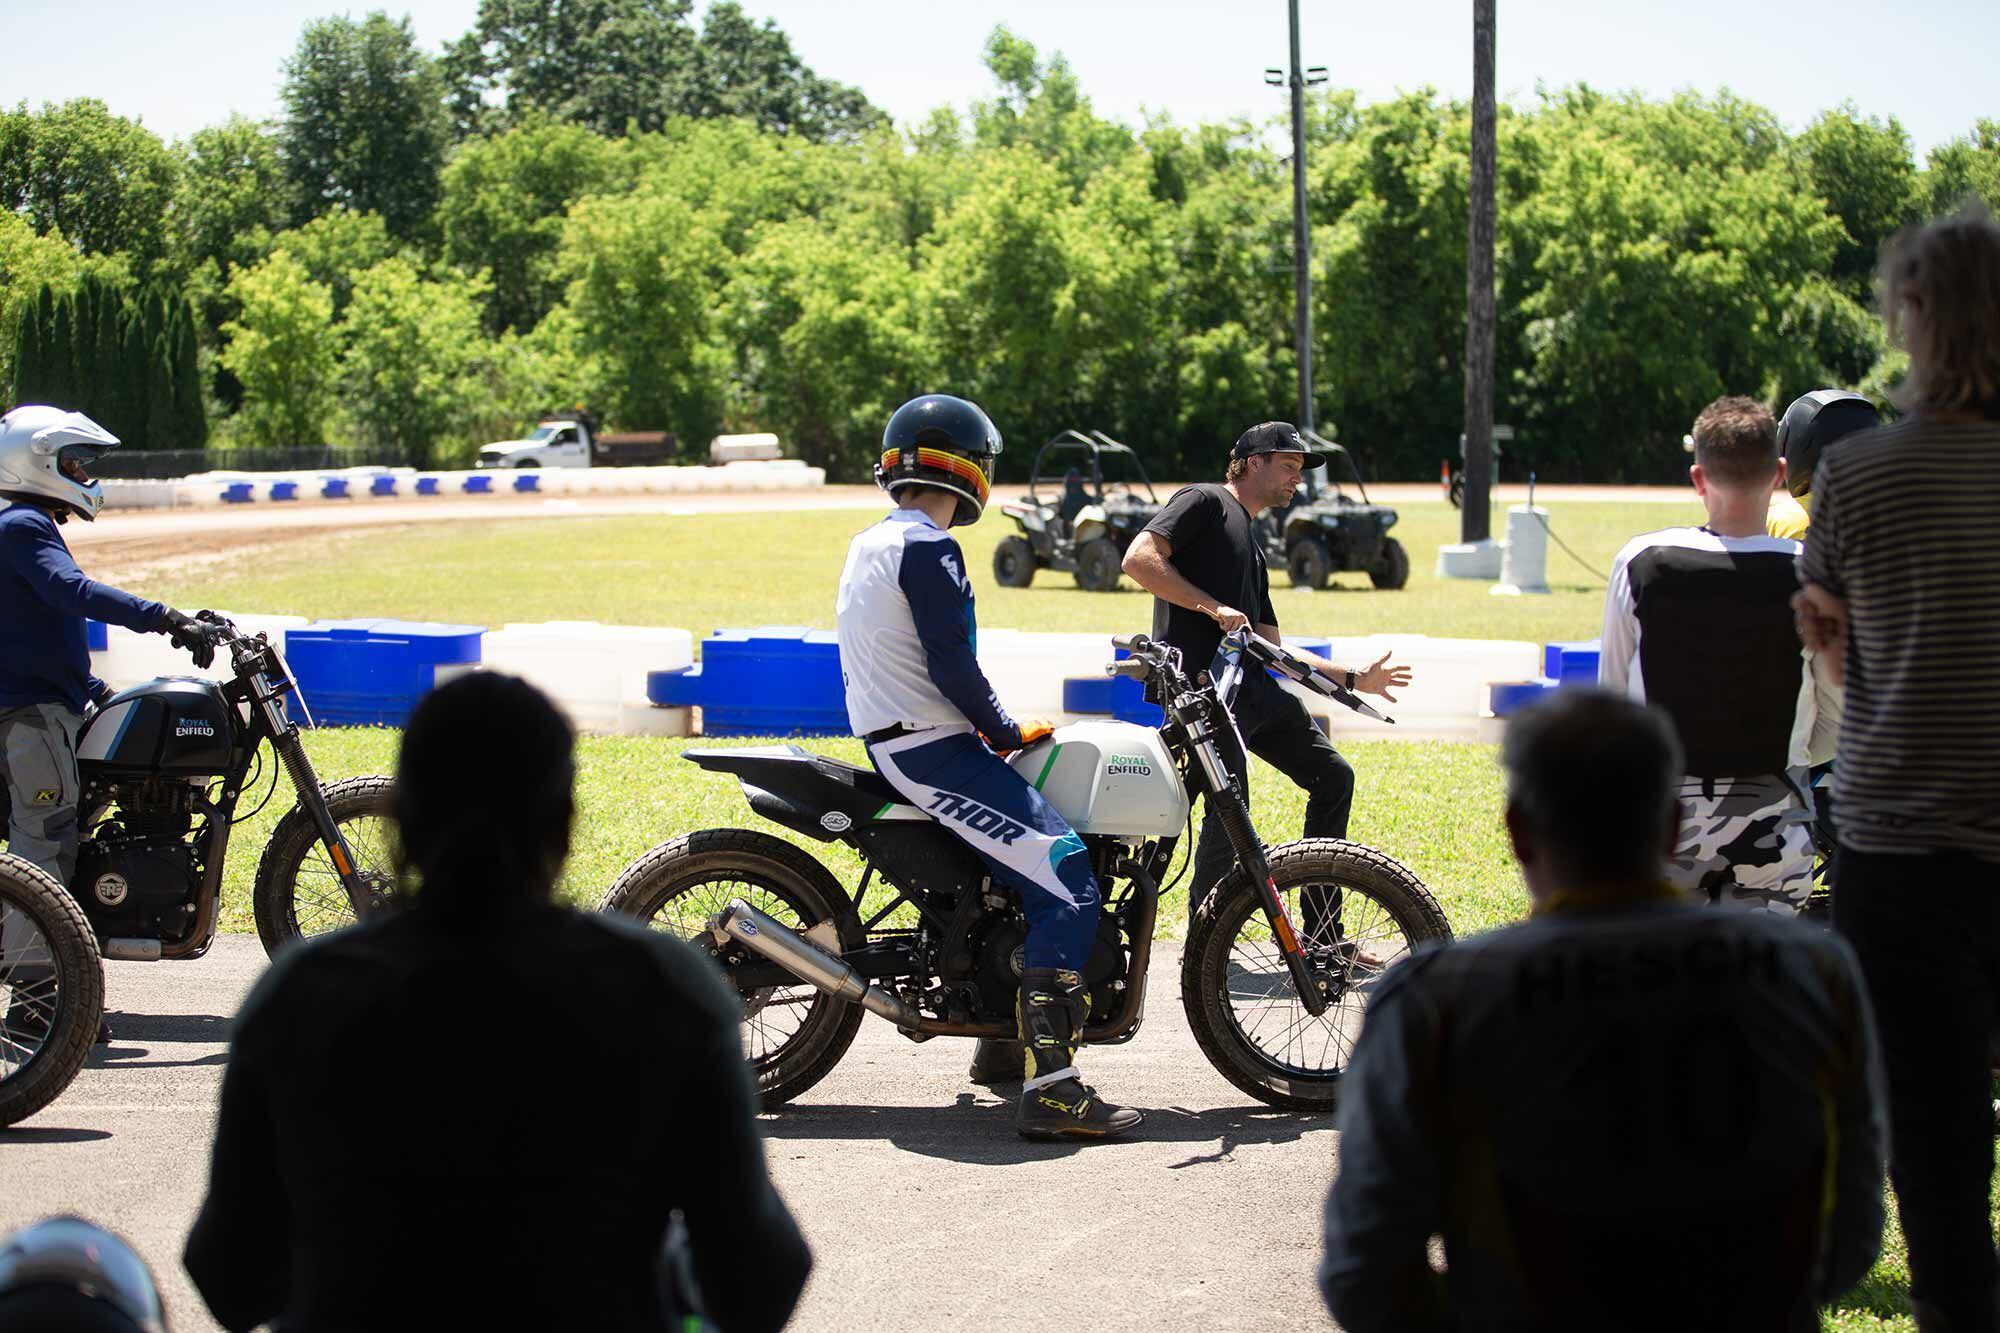 Slide School currently costs $300 for a three-hour class and includes bike rental. In addition to schools during the AFT season, Lewis conducts training at his Moto Anatomy facility in Center Hill, Florida, and other locations throughout the year.